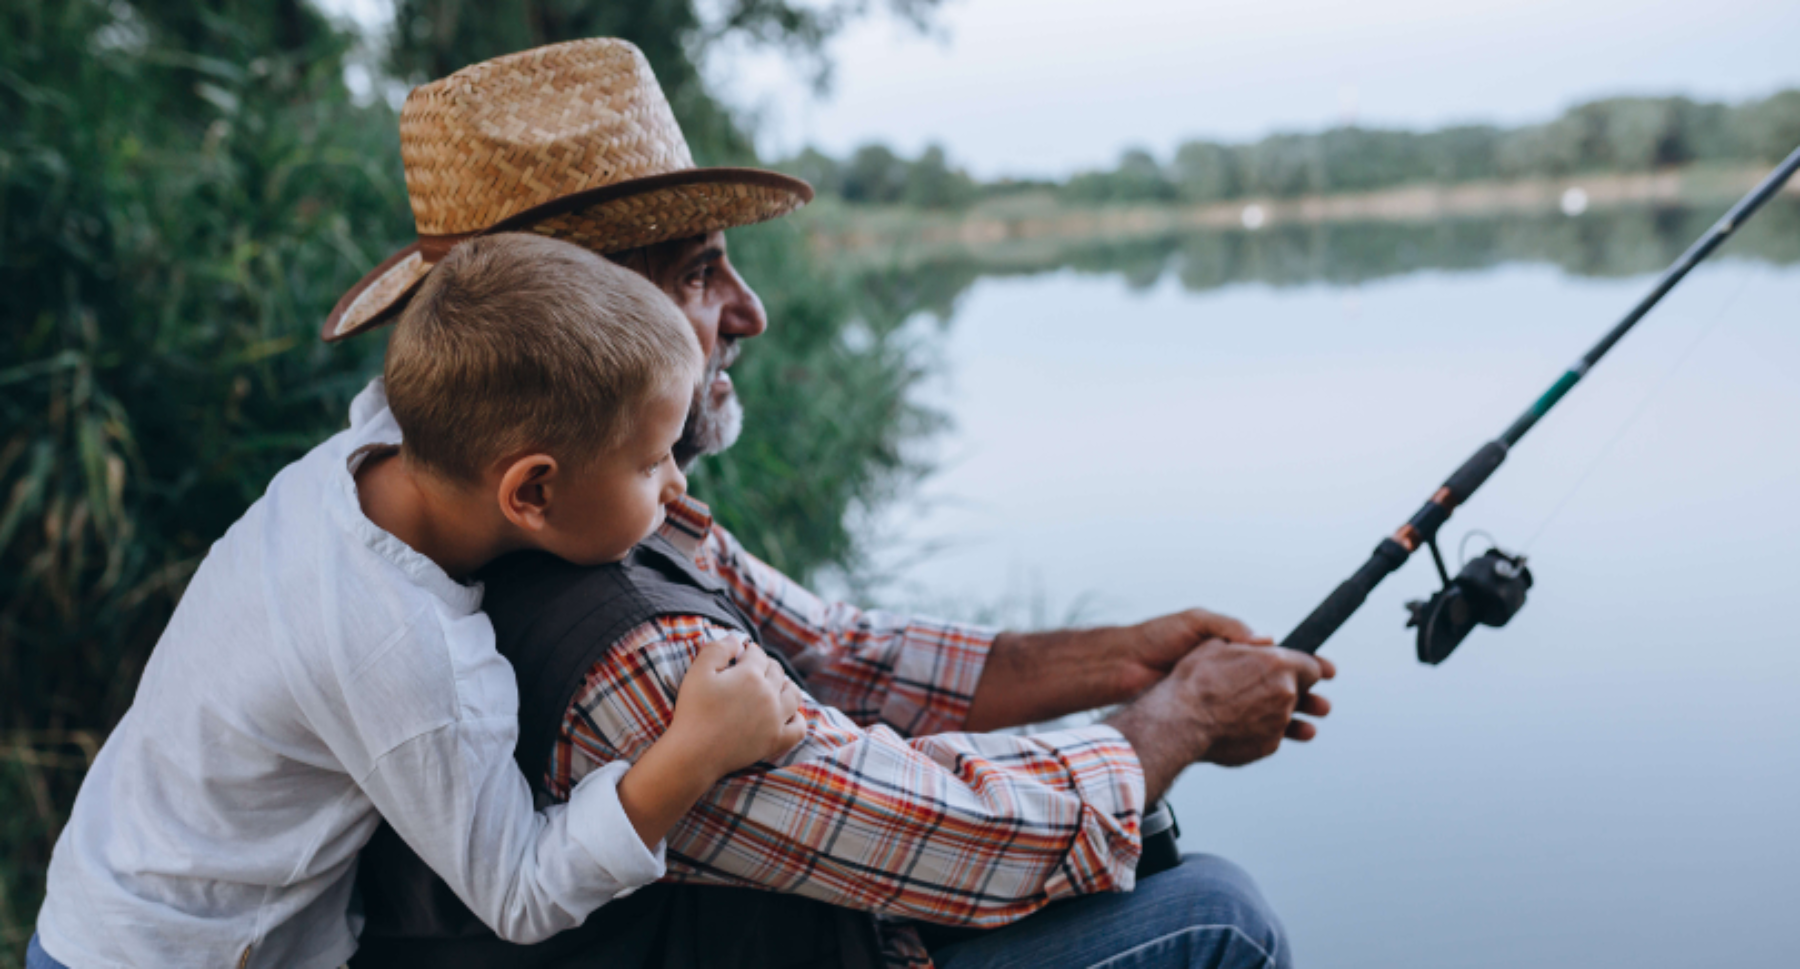 Grandfather and grandson fishing by a river.